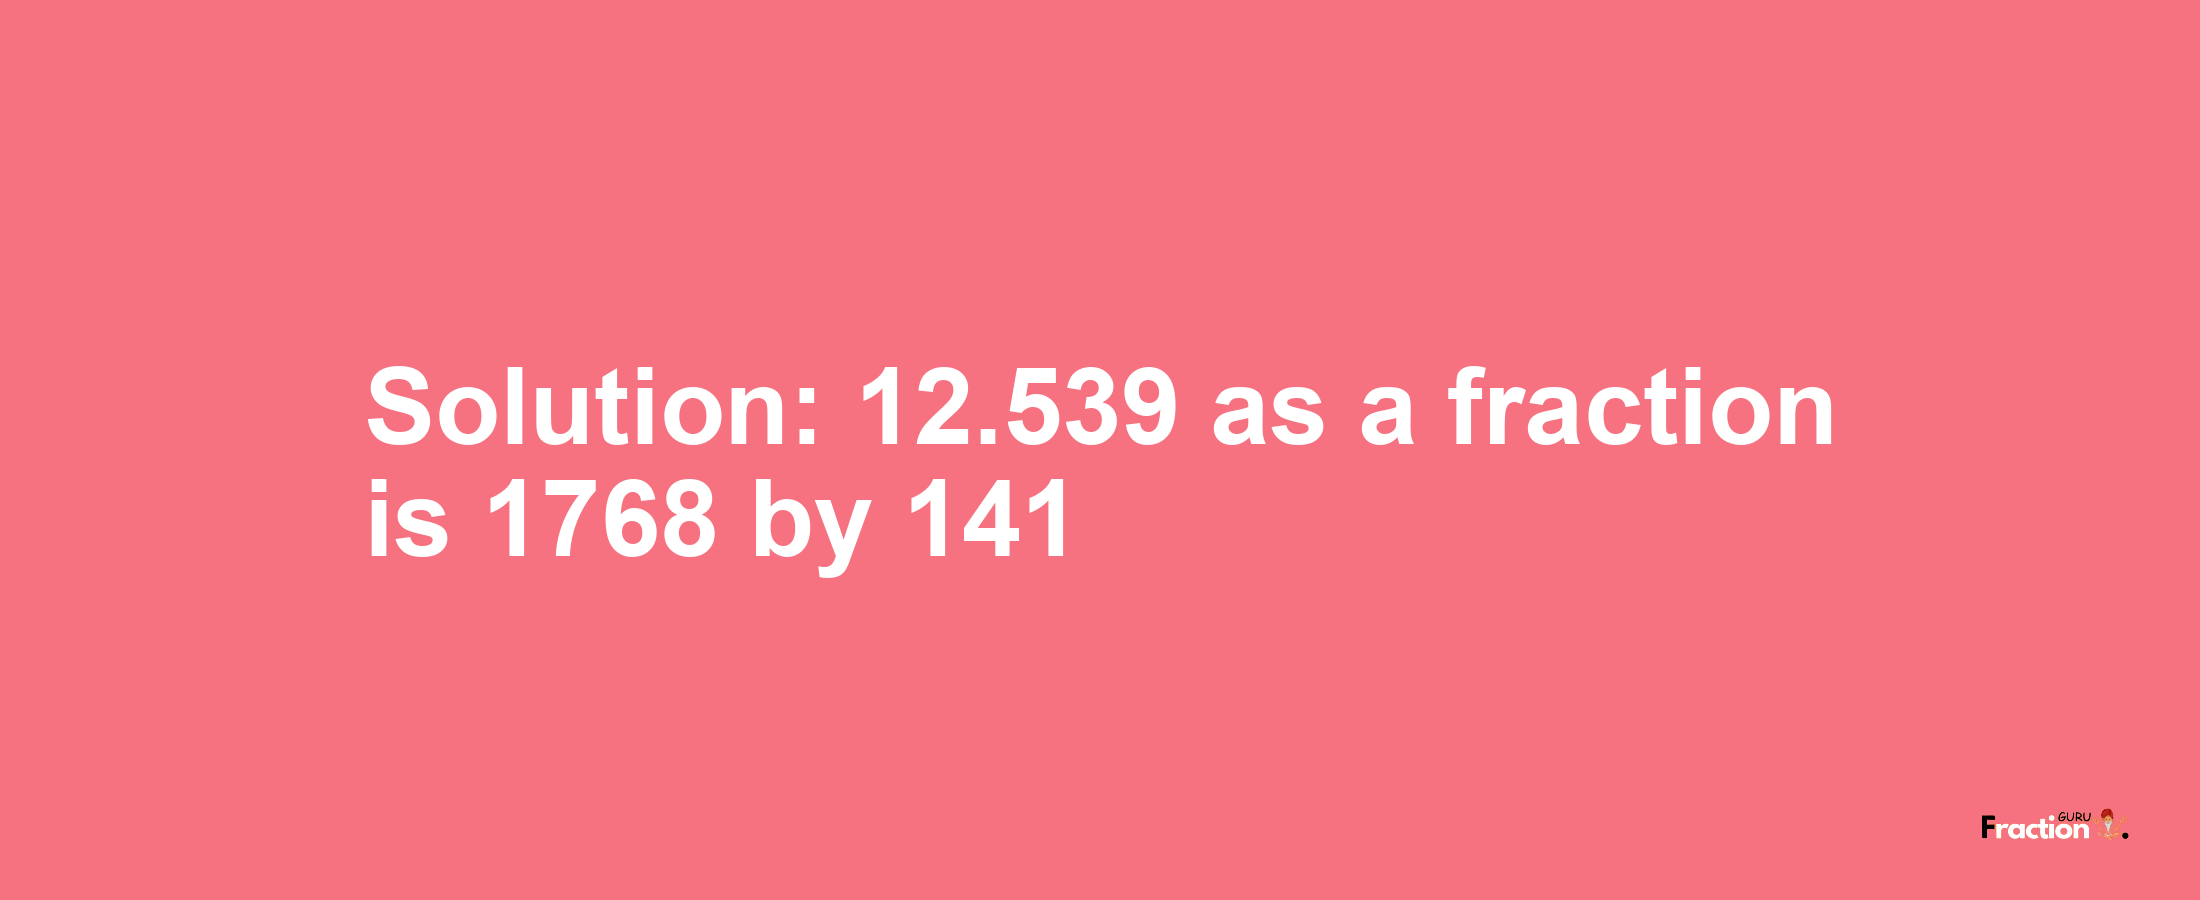 Solution:12.539 as a fraction is 1768/141